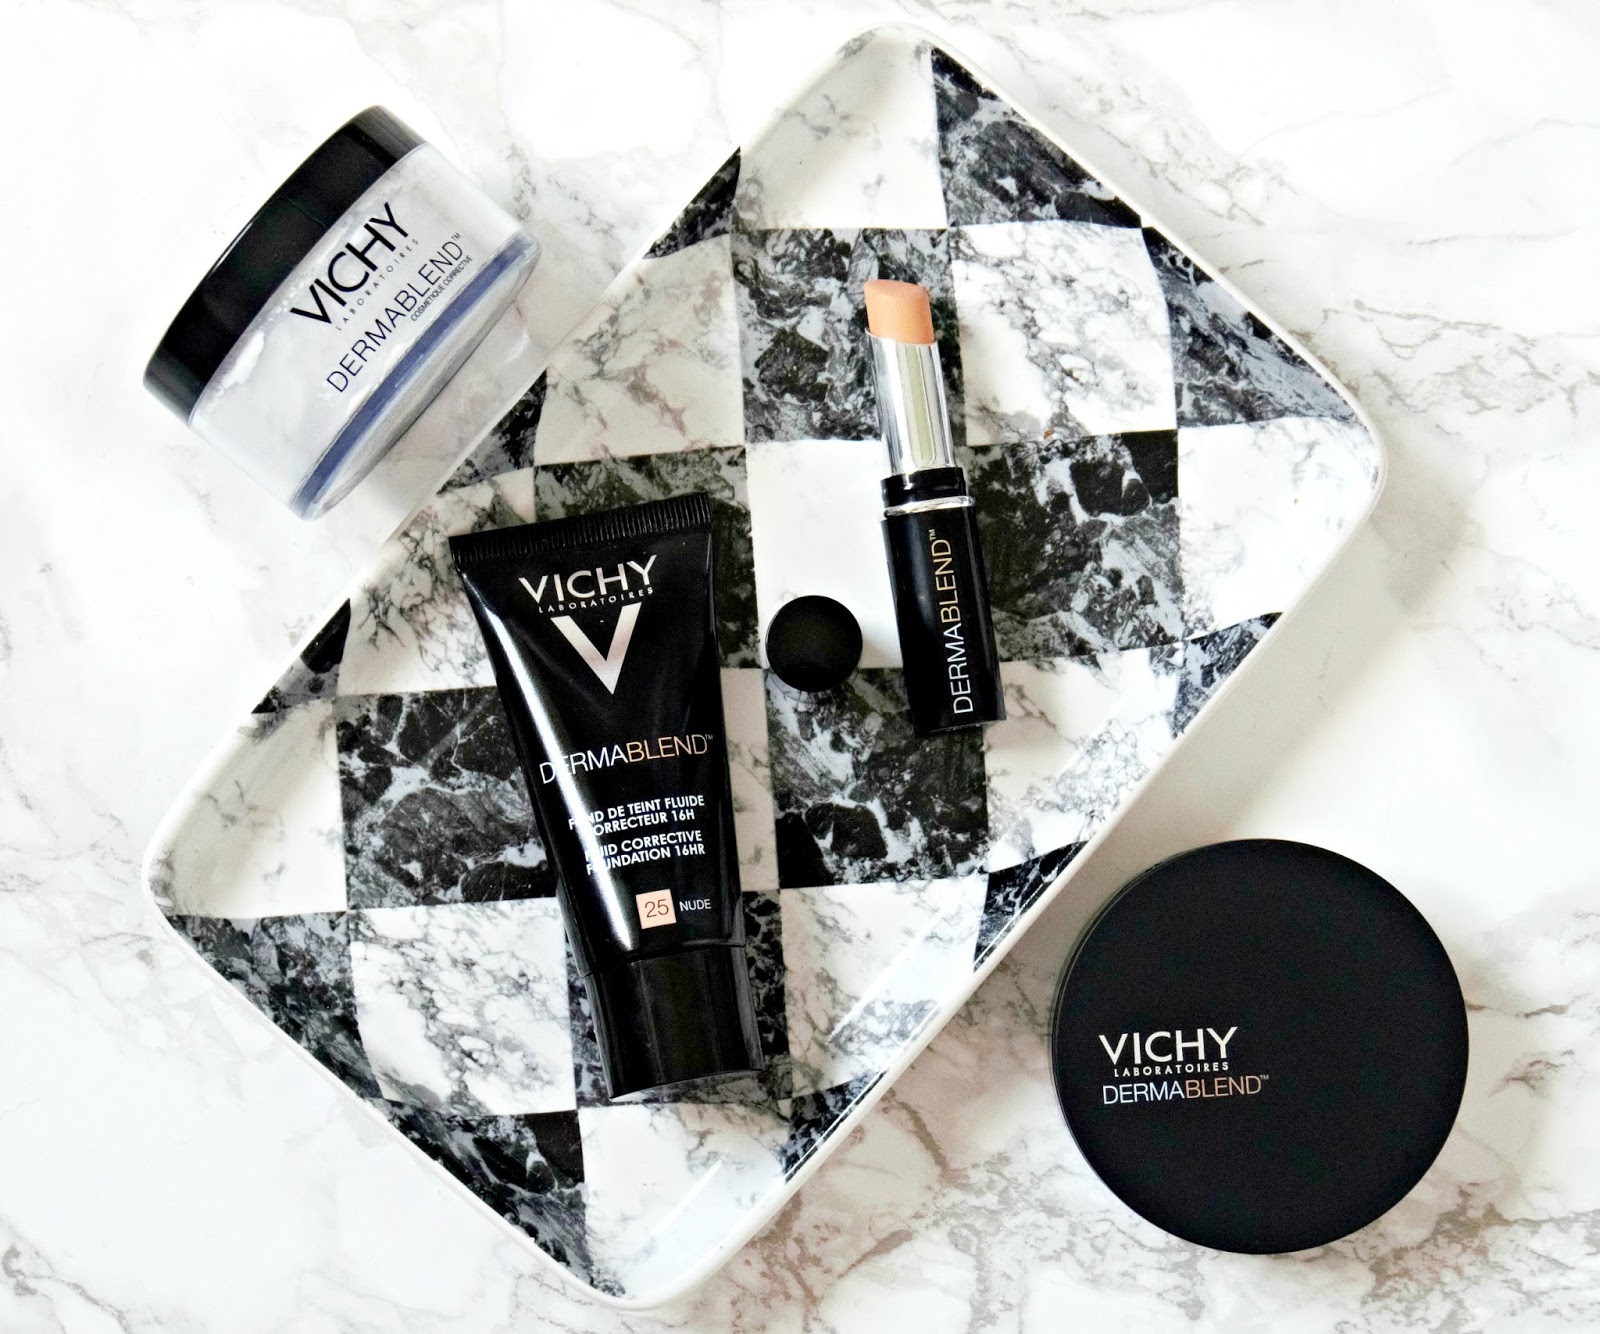 Vichy Dermablend Range Review, Concealer, Foundation, Compact Powder, Setting Powder